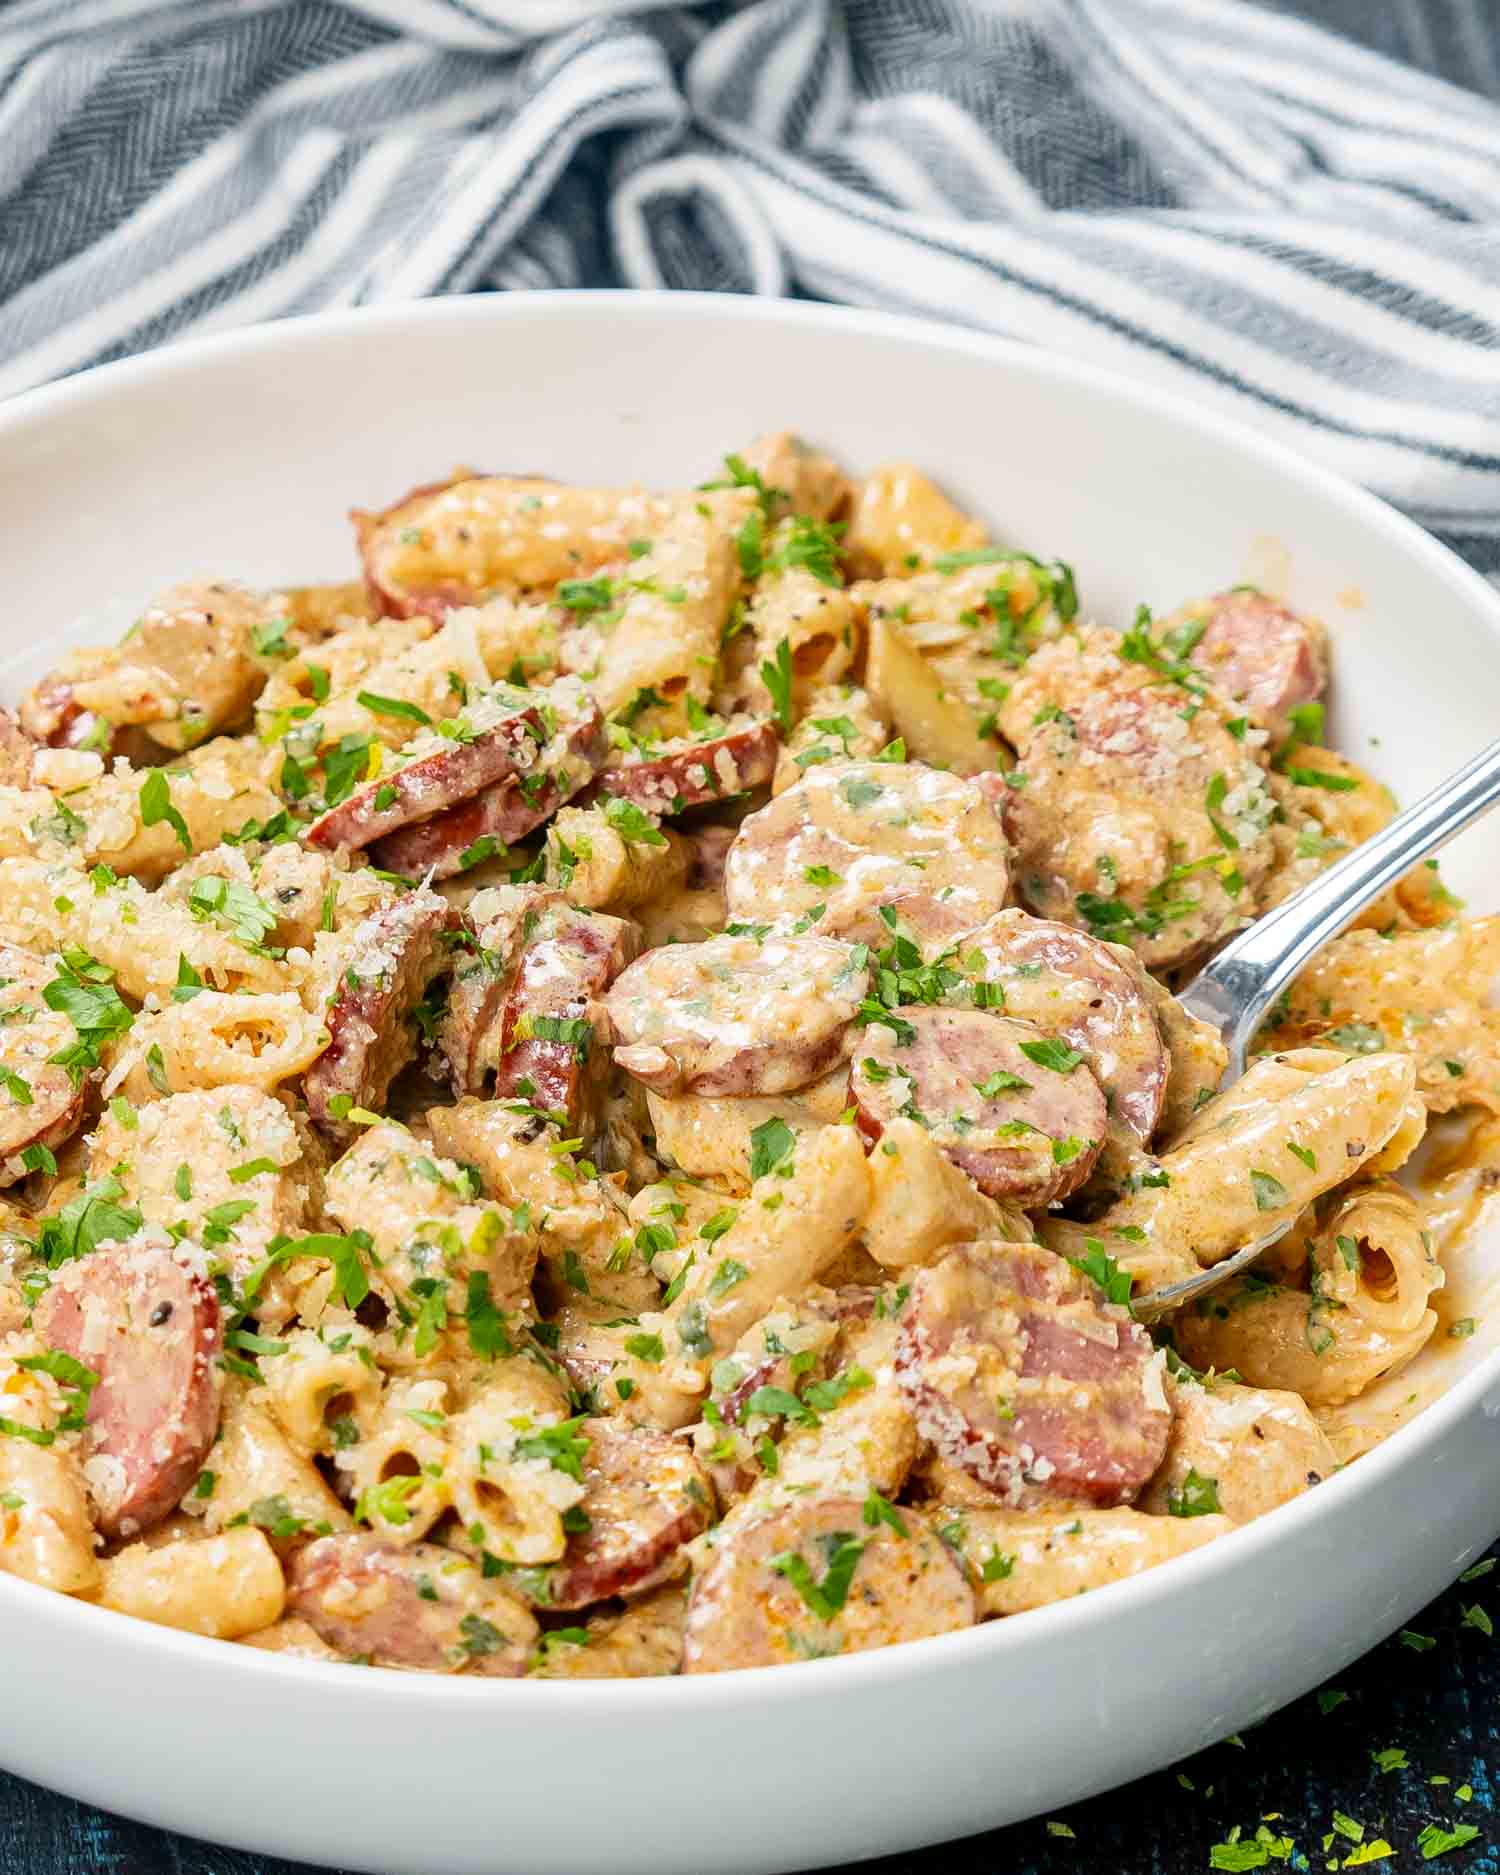 cajun chicken pasta garnished with parsley in a white bowl.